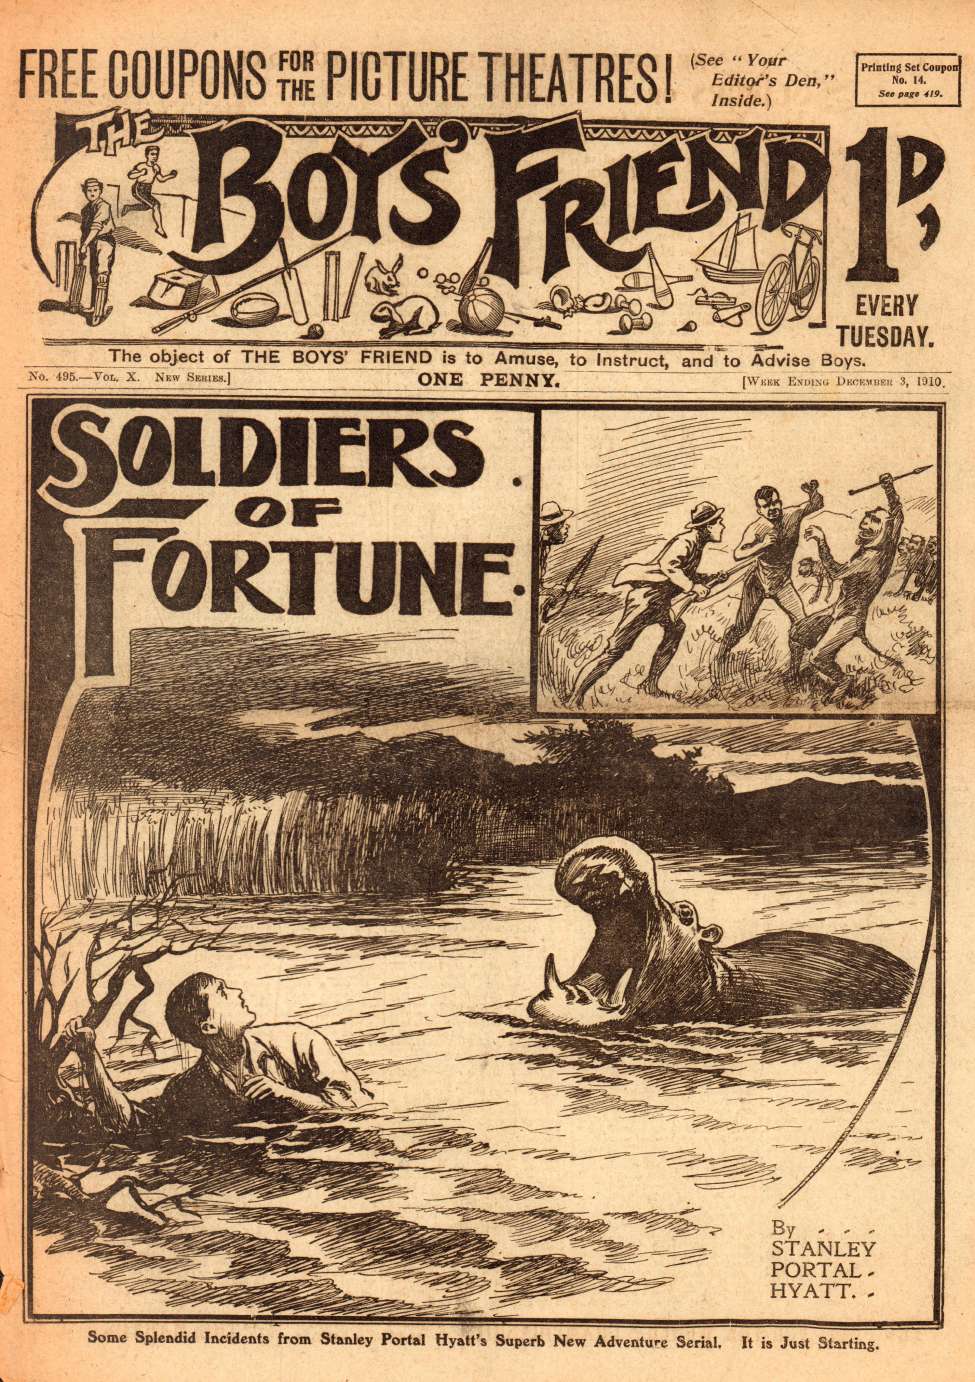 Comic Book Cover For The Boys' Friend 495 - Soldiers of Fortune